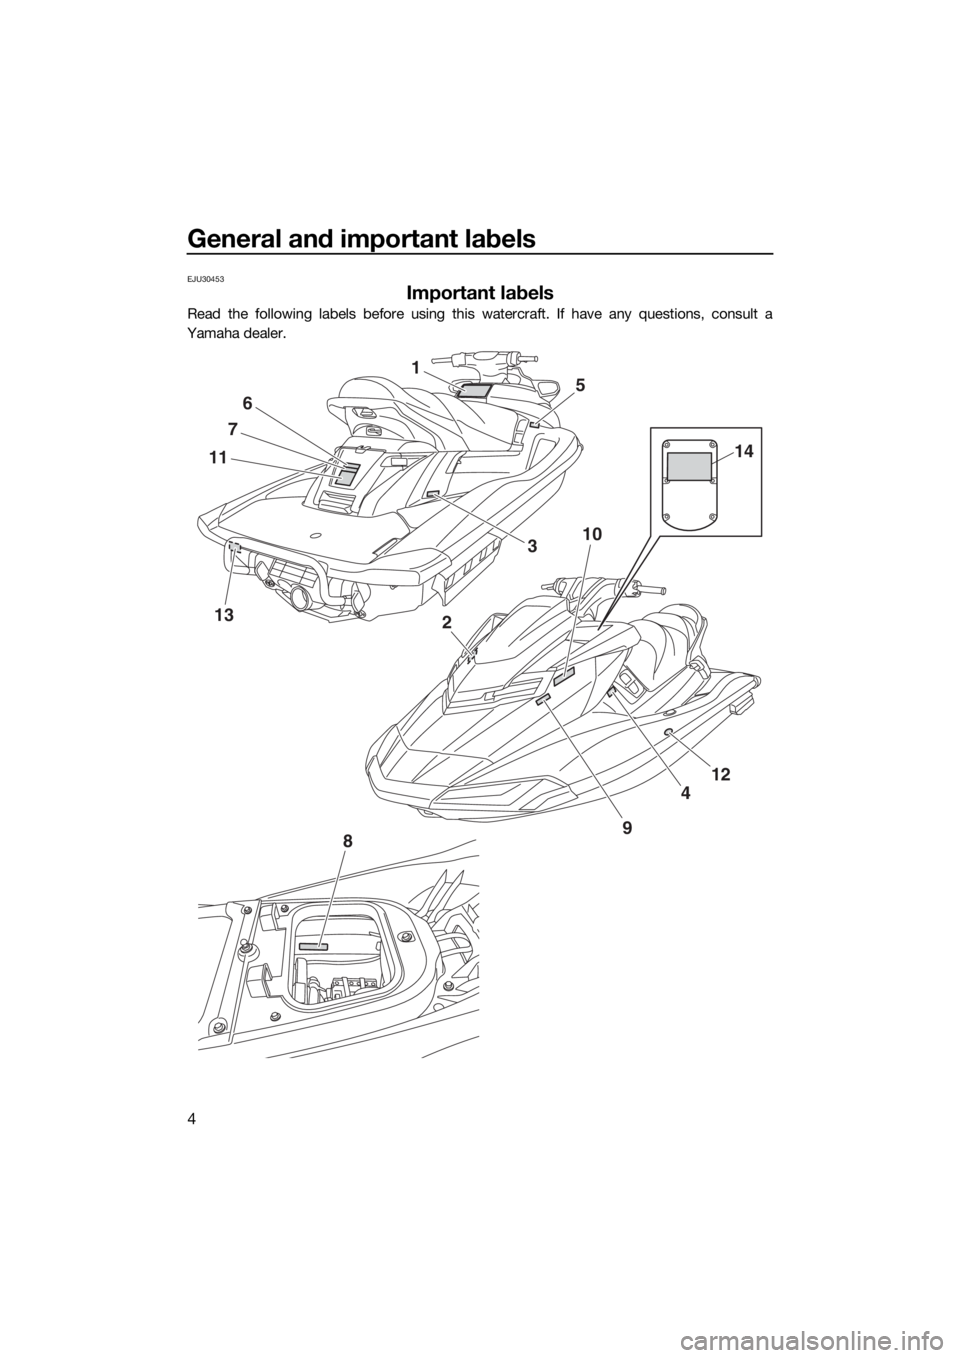 YAMAHA FX HO 2016  Owners Manual General and important labels
4
EJU30453
Important labels
Read the following labels before using this watercraft. If have any questions, consult a
Yamaha dealer.
13
1
11
7
6
10
2
8
4
12
9
5
3
14
UF2T75